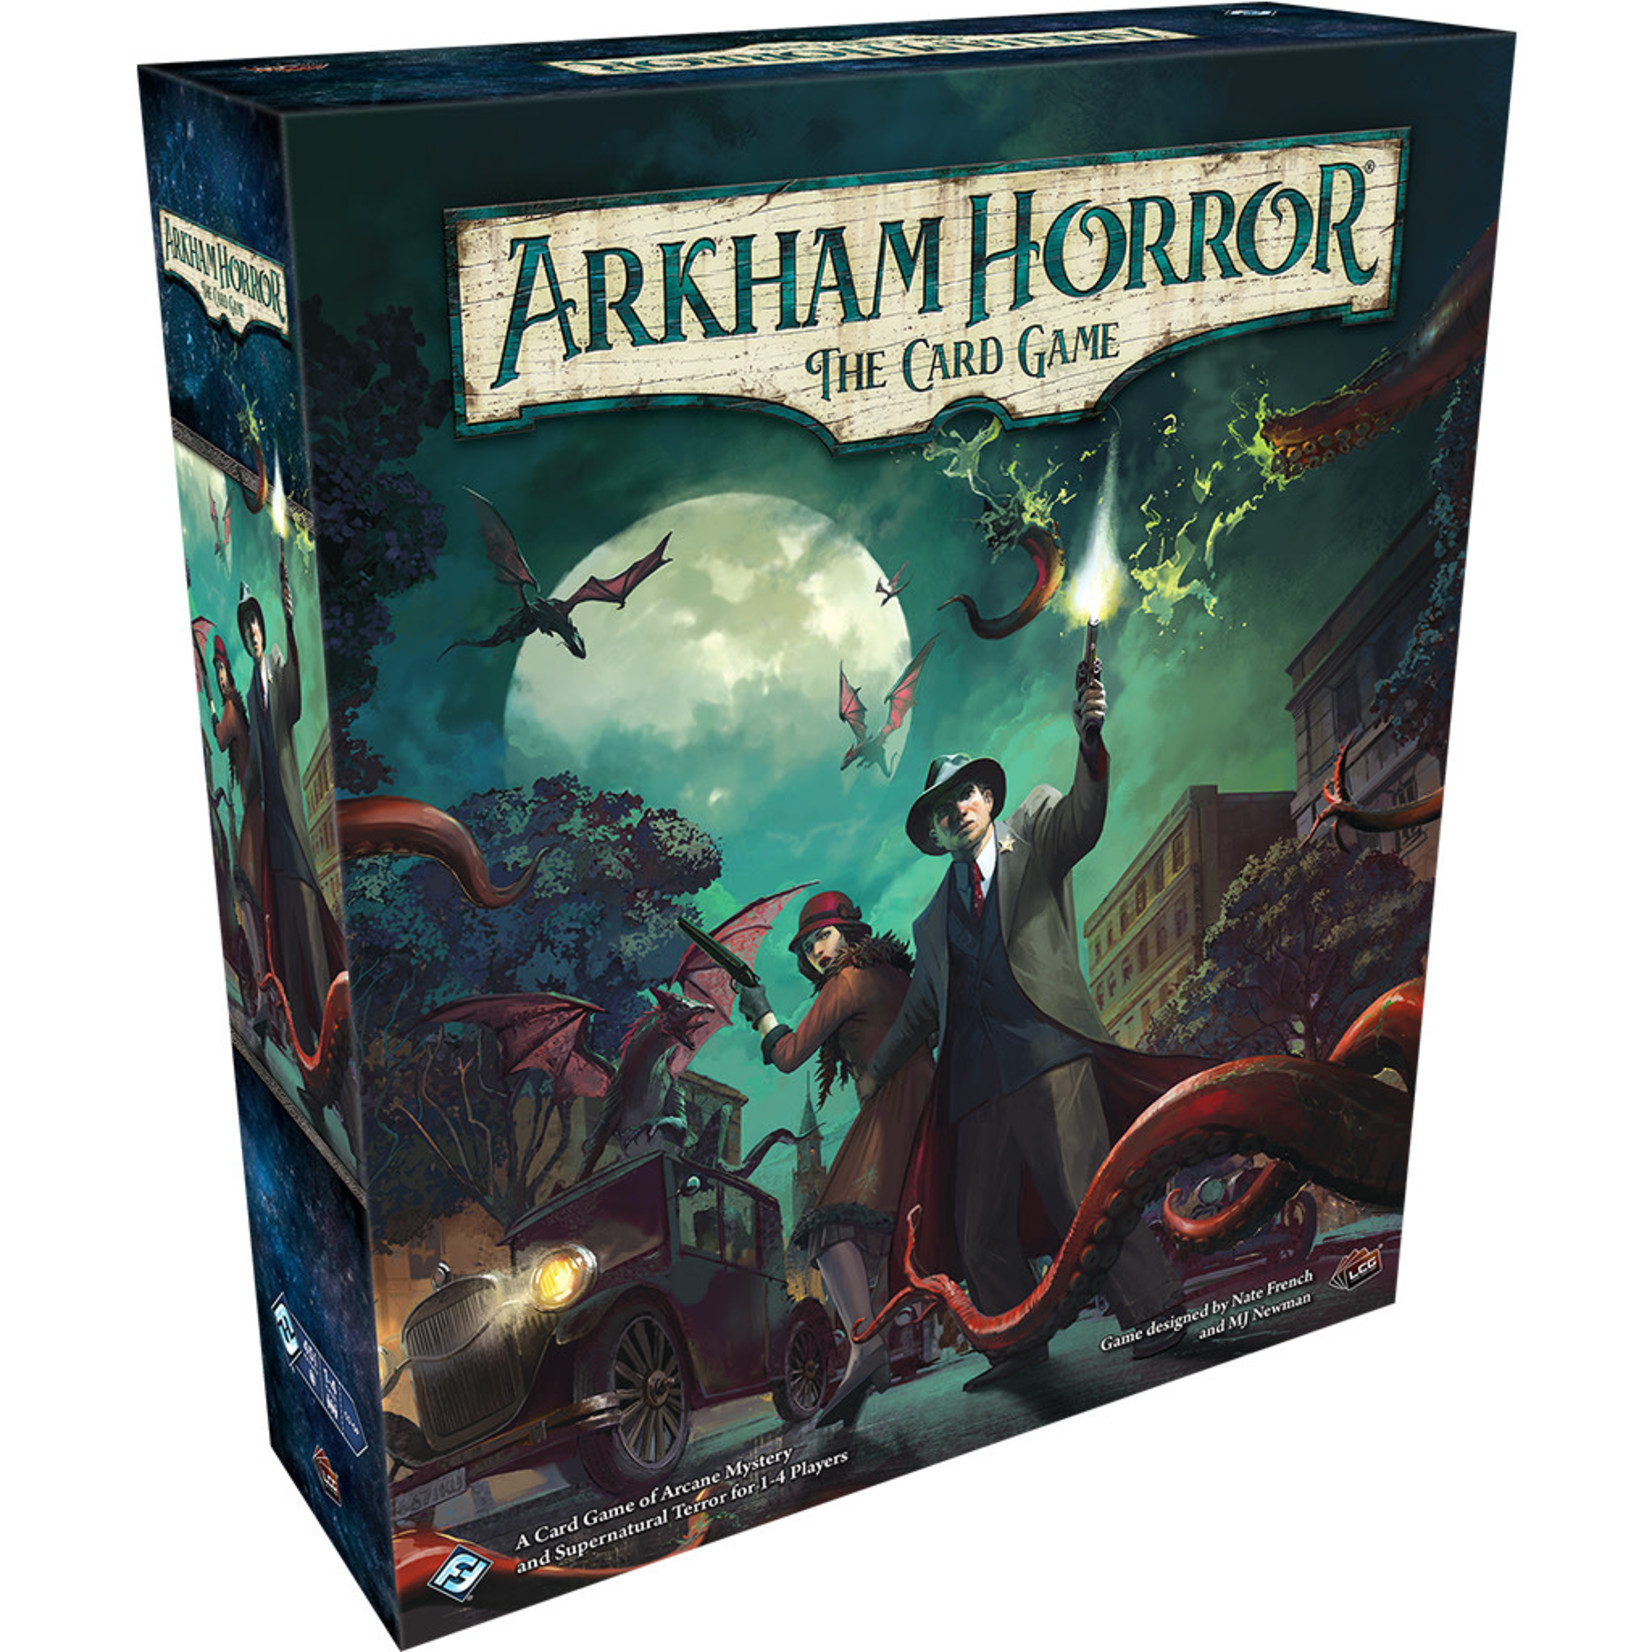 Fantasy Flight Arkham Horror: The Card Game - Revised Core Set (ANA Top 40)